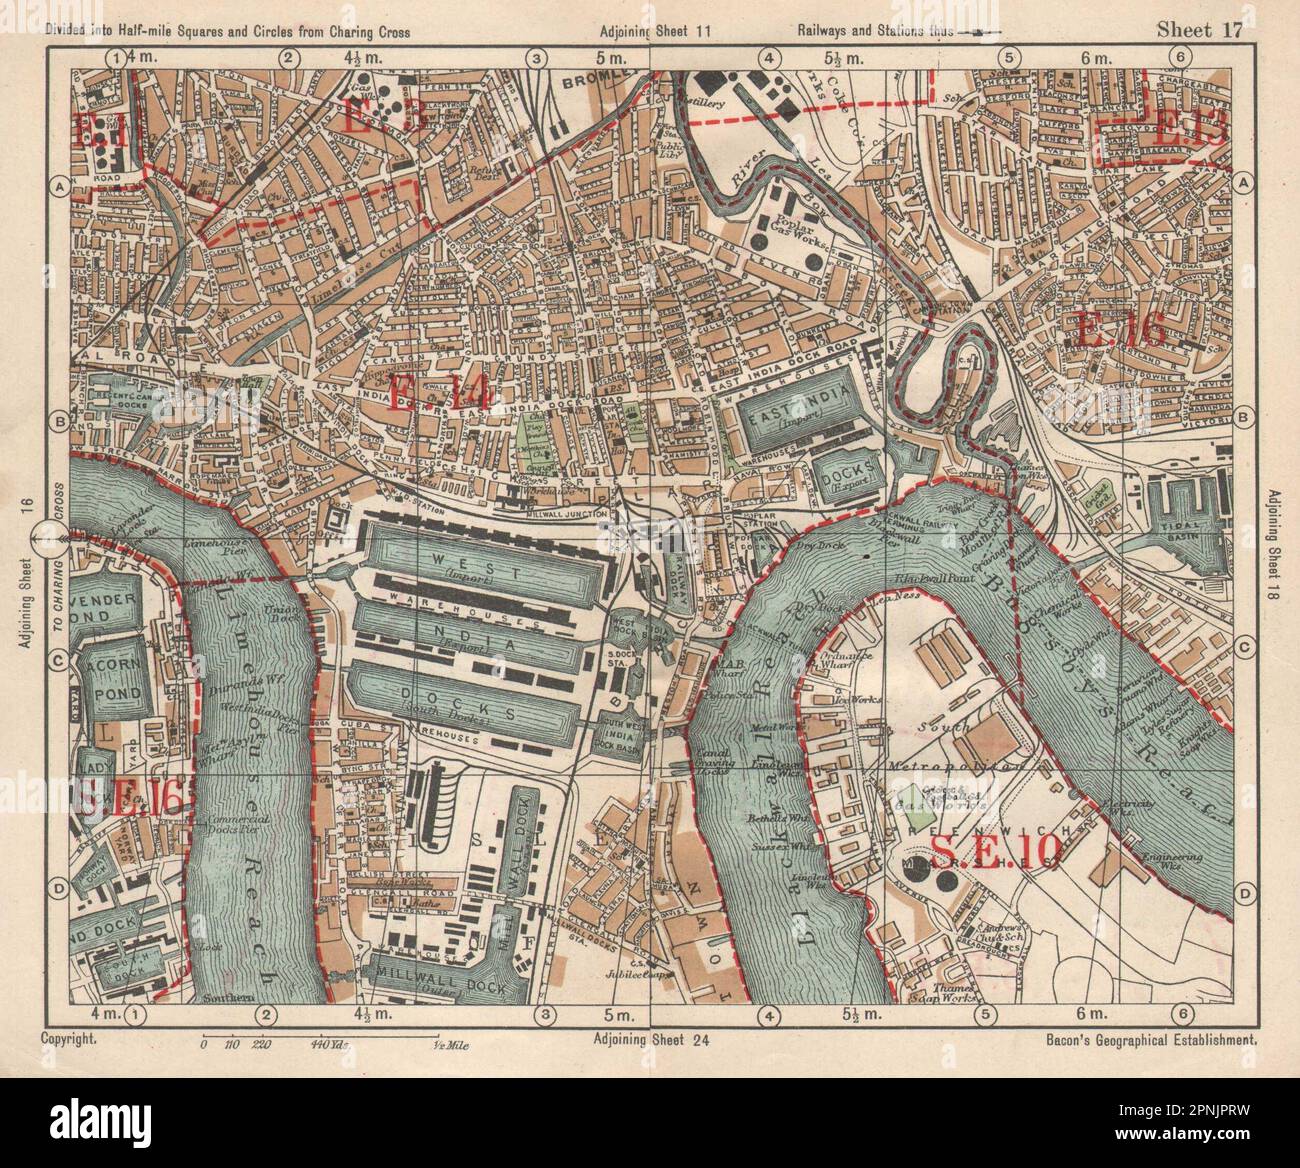 E LONDON Surrey Docks Isle of Dogs Canning Town Poplar Limehouse.BACON 1925 map Stock Photo